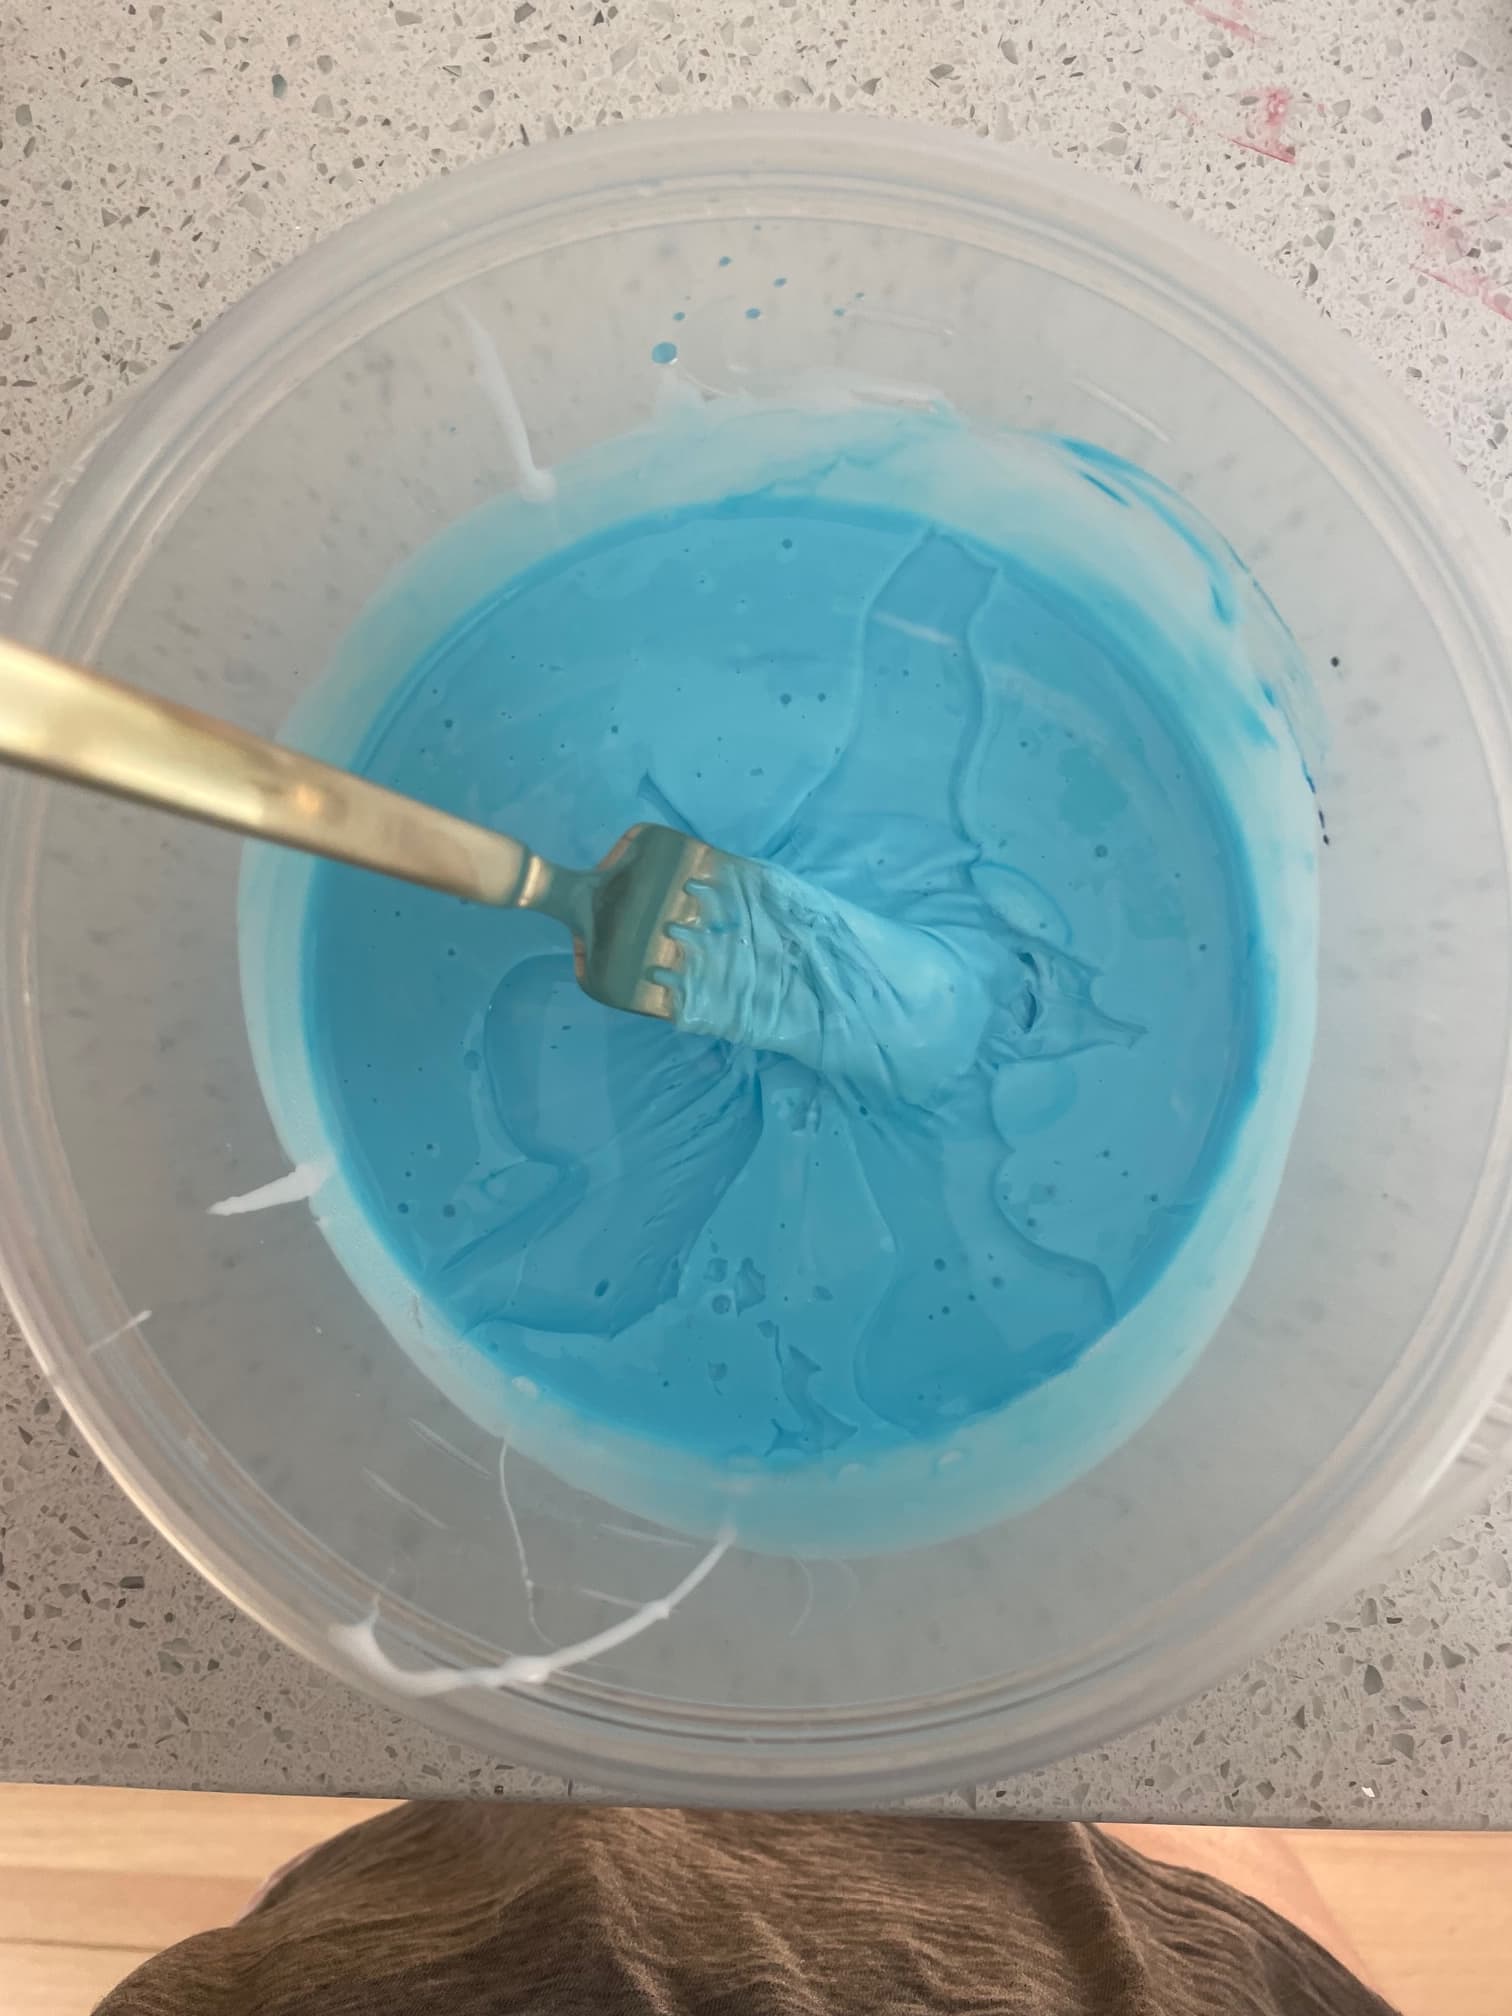 I've Been Using DIY Slime to Clean My Kitchen - Review